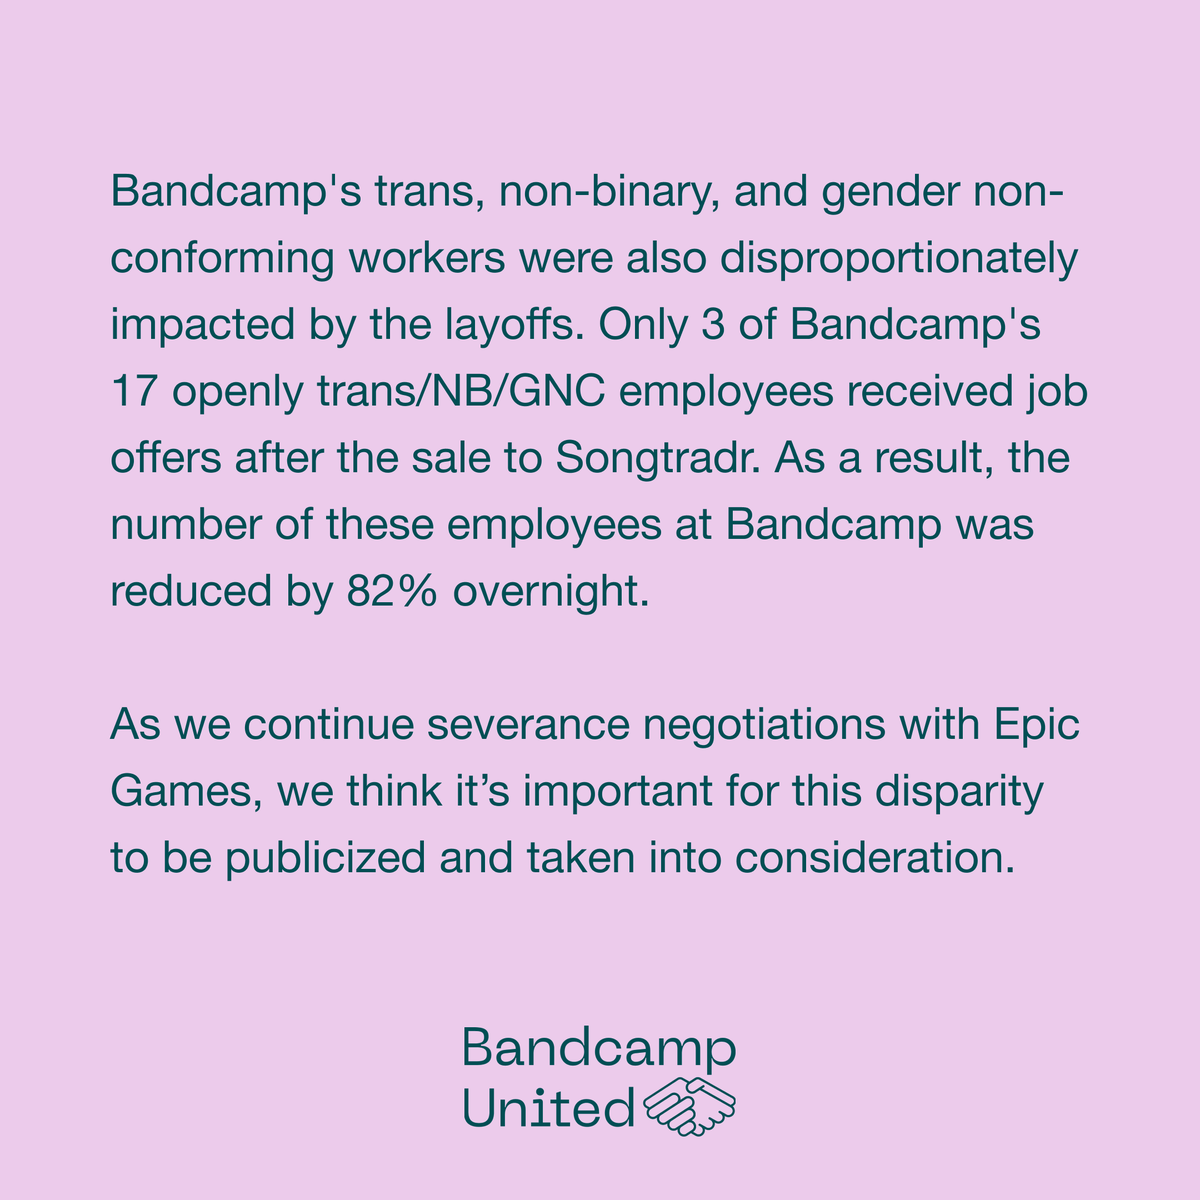 We wanted to share additional layoff demographic information. These numbers include the whole staff at Bandcamp (including non-union eligible workers), but it is important context as we return to effects bargaining with Epic Games on 11/9.